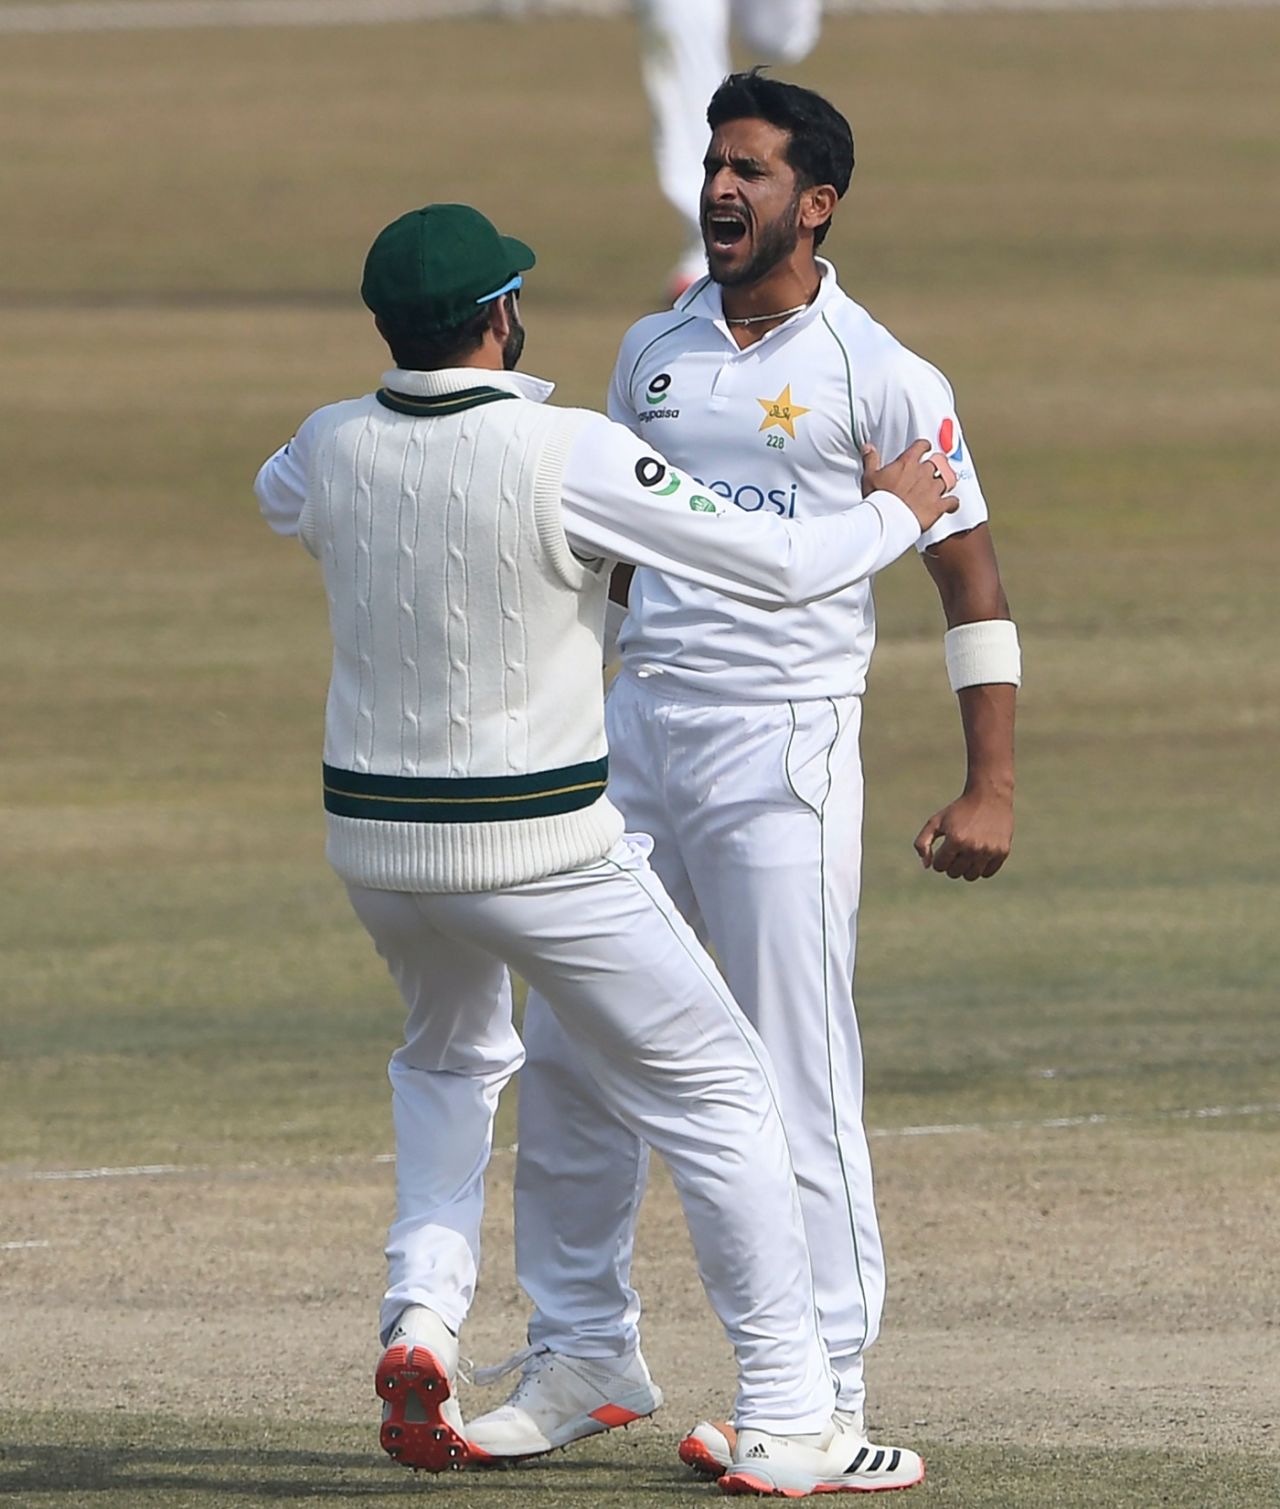 Hasan Ali lets out a roar after sending back Aiden Markram, Pakistan vs South Africa, 2nd Test, Rawalpindi, 5th day, February 8, 2021